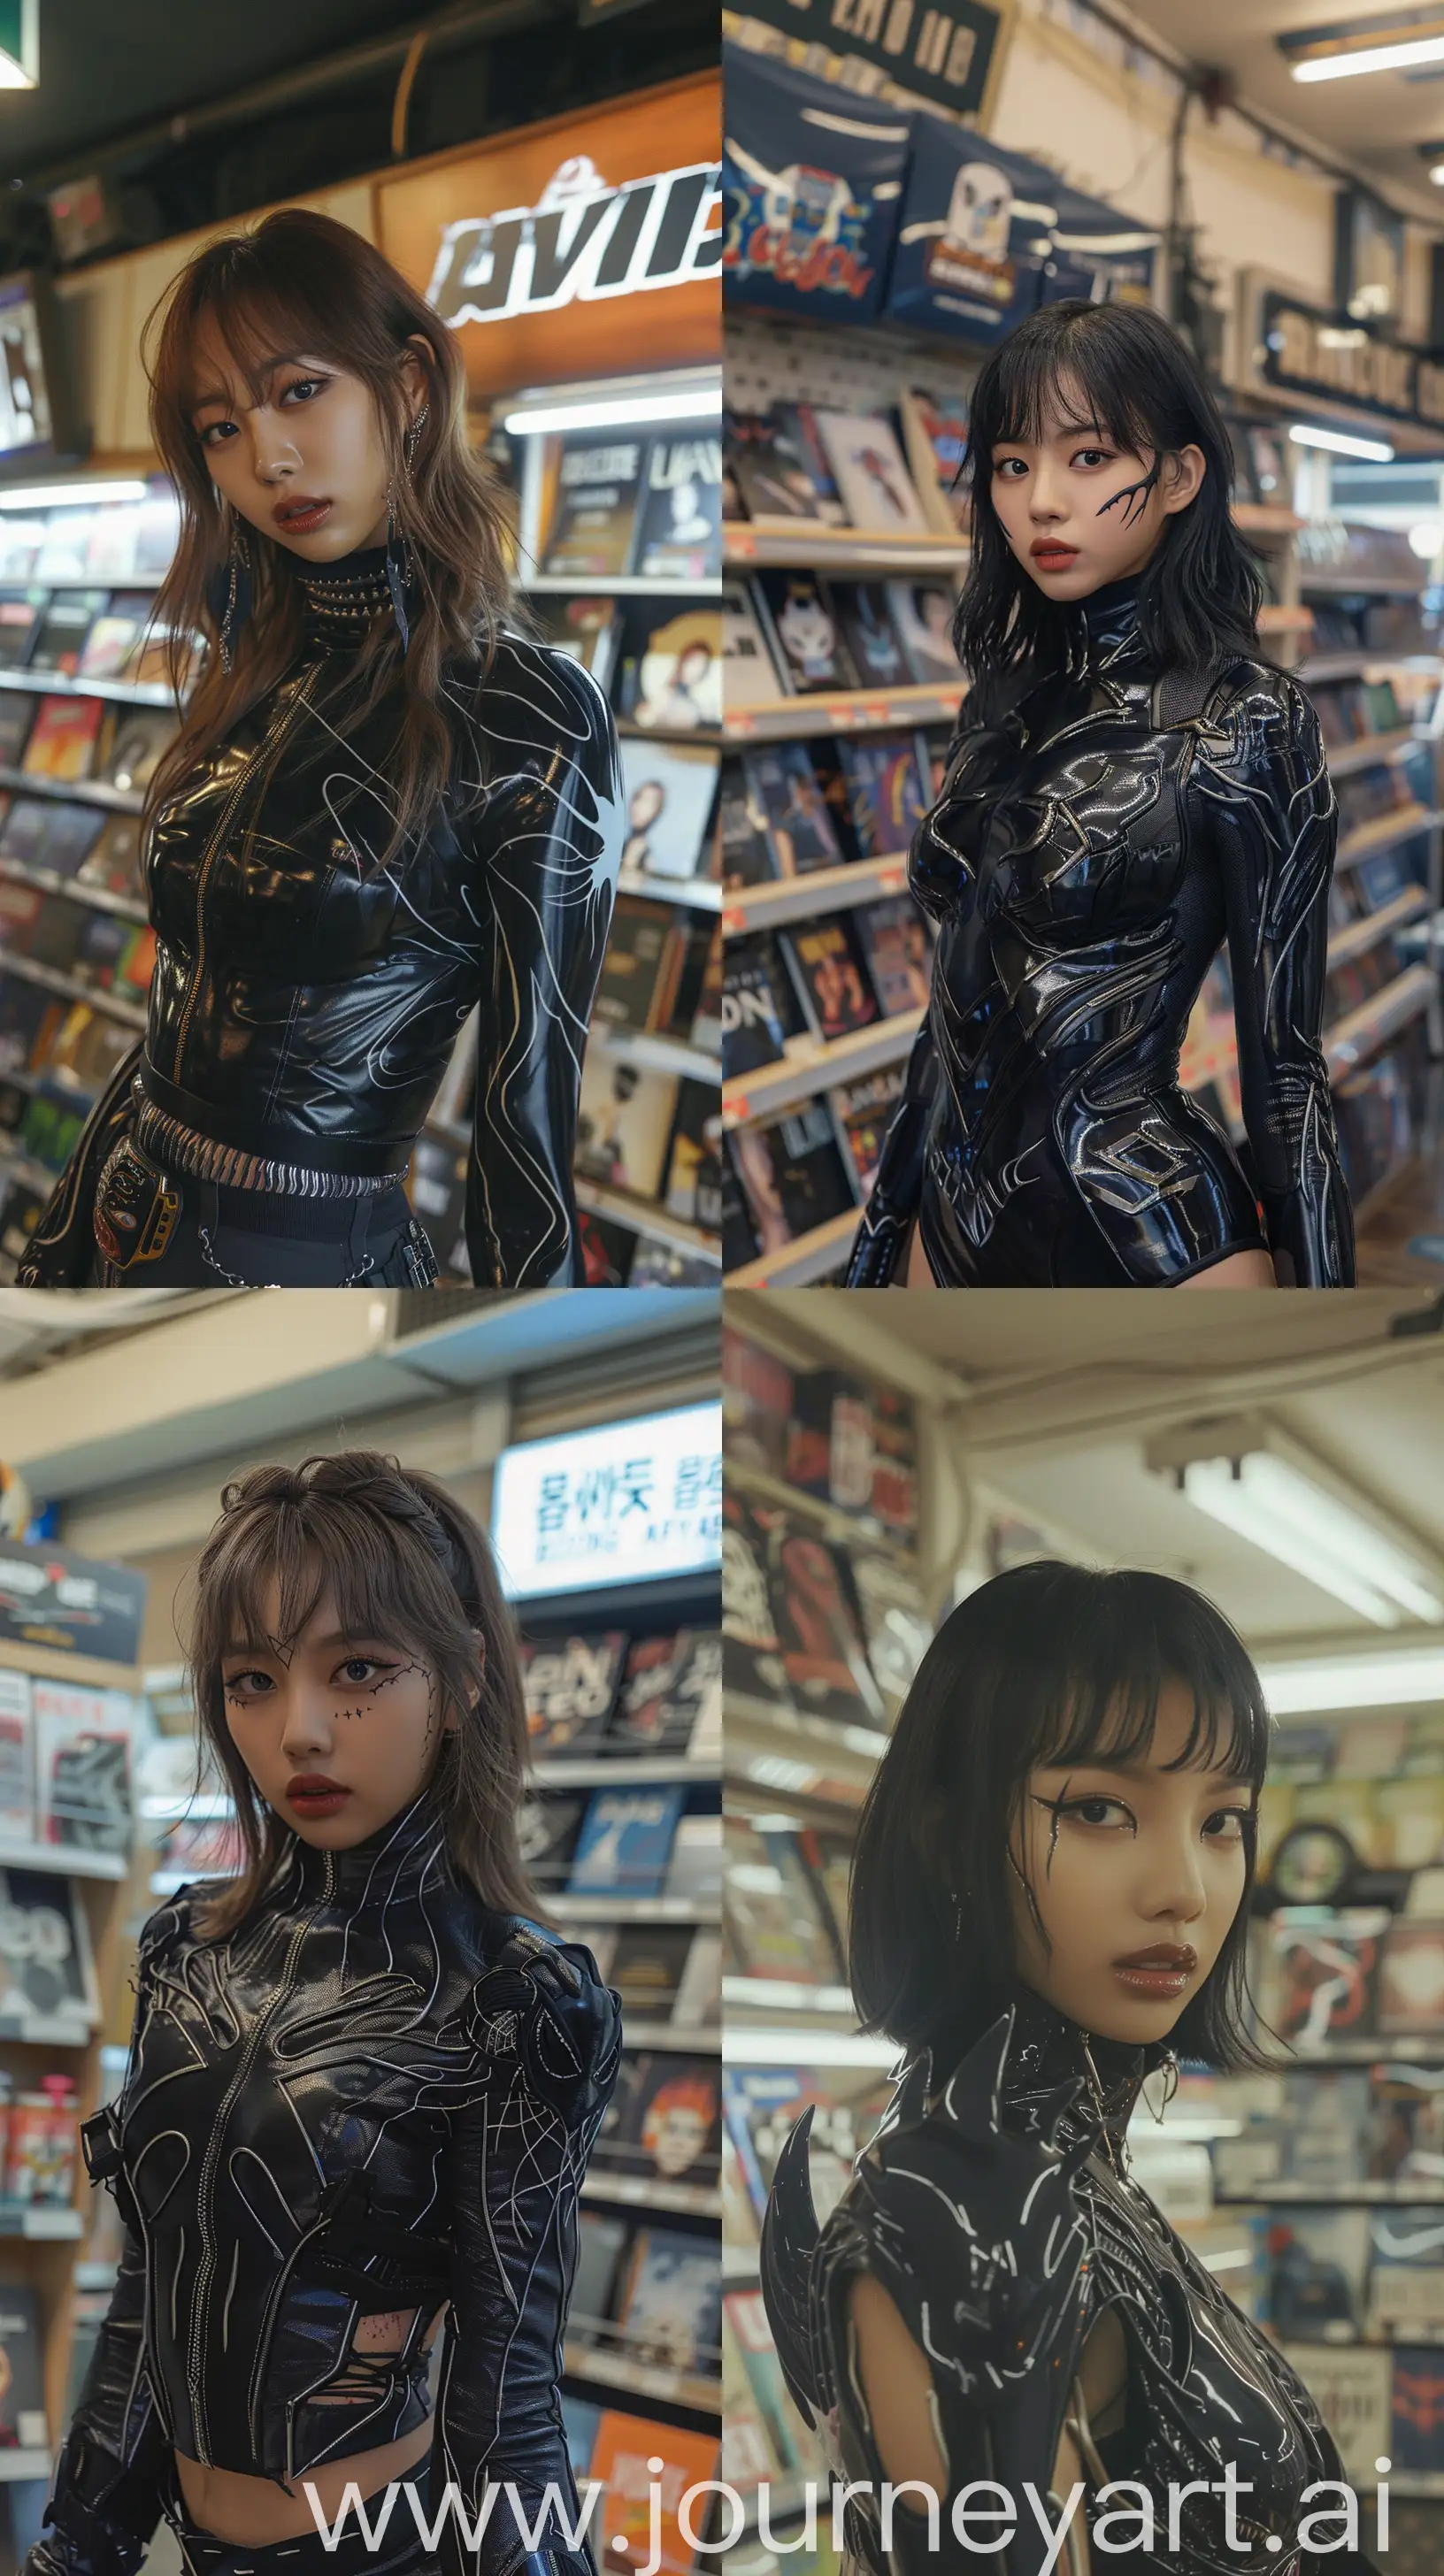 Blackpinks-Jennie-with-Wolfcut-Hair-in-Grunge-Aesthetic-Venom-Suit-at-Album-Store